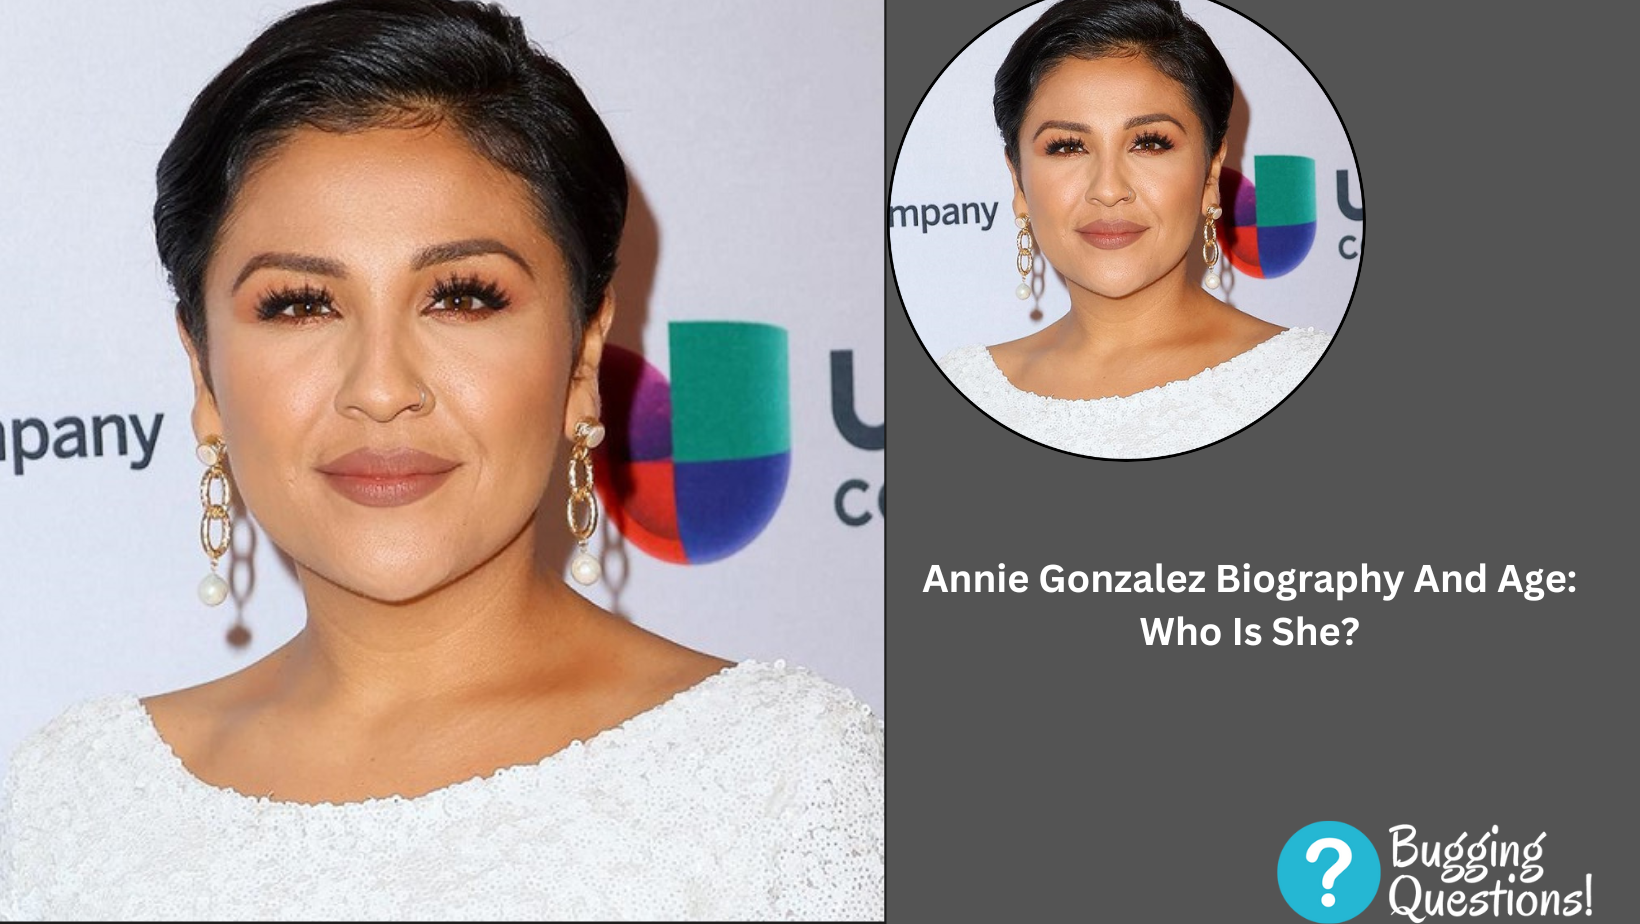 Annie Gonzalez Biography And Age: Who Is She?